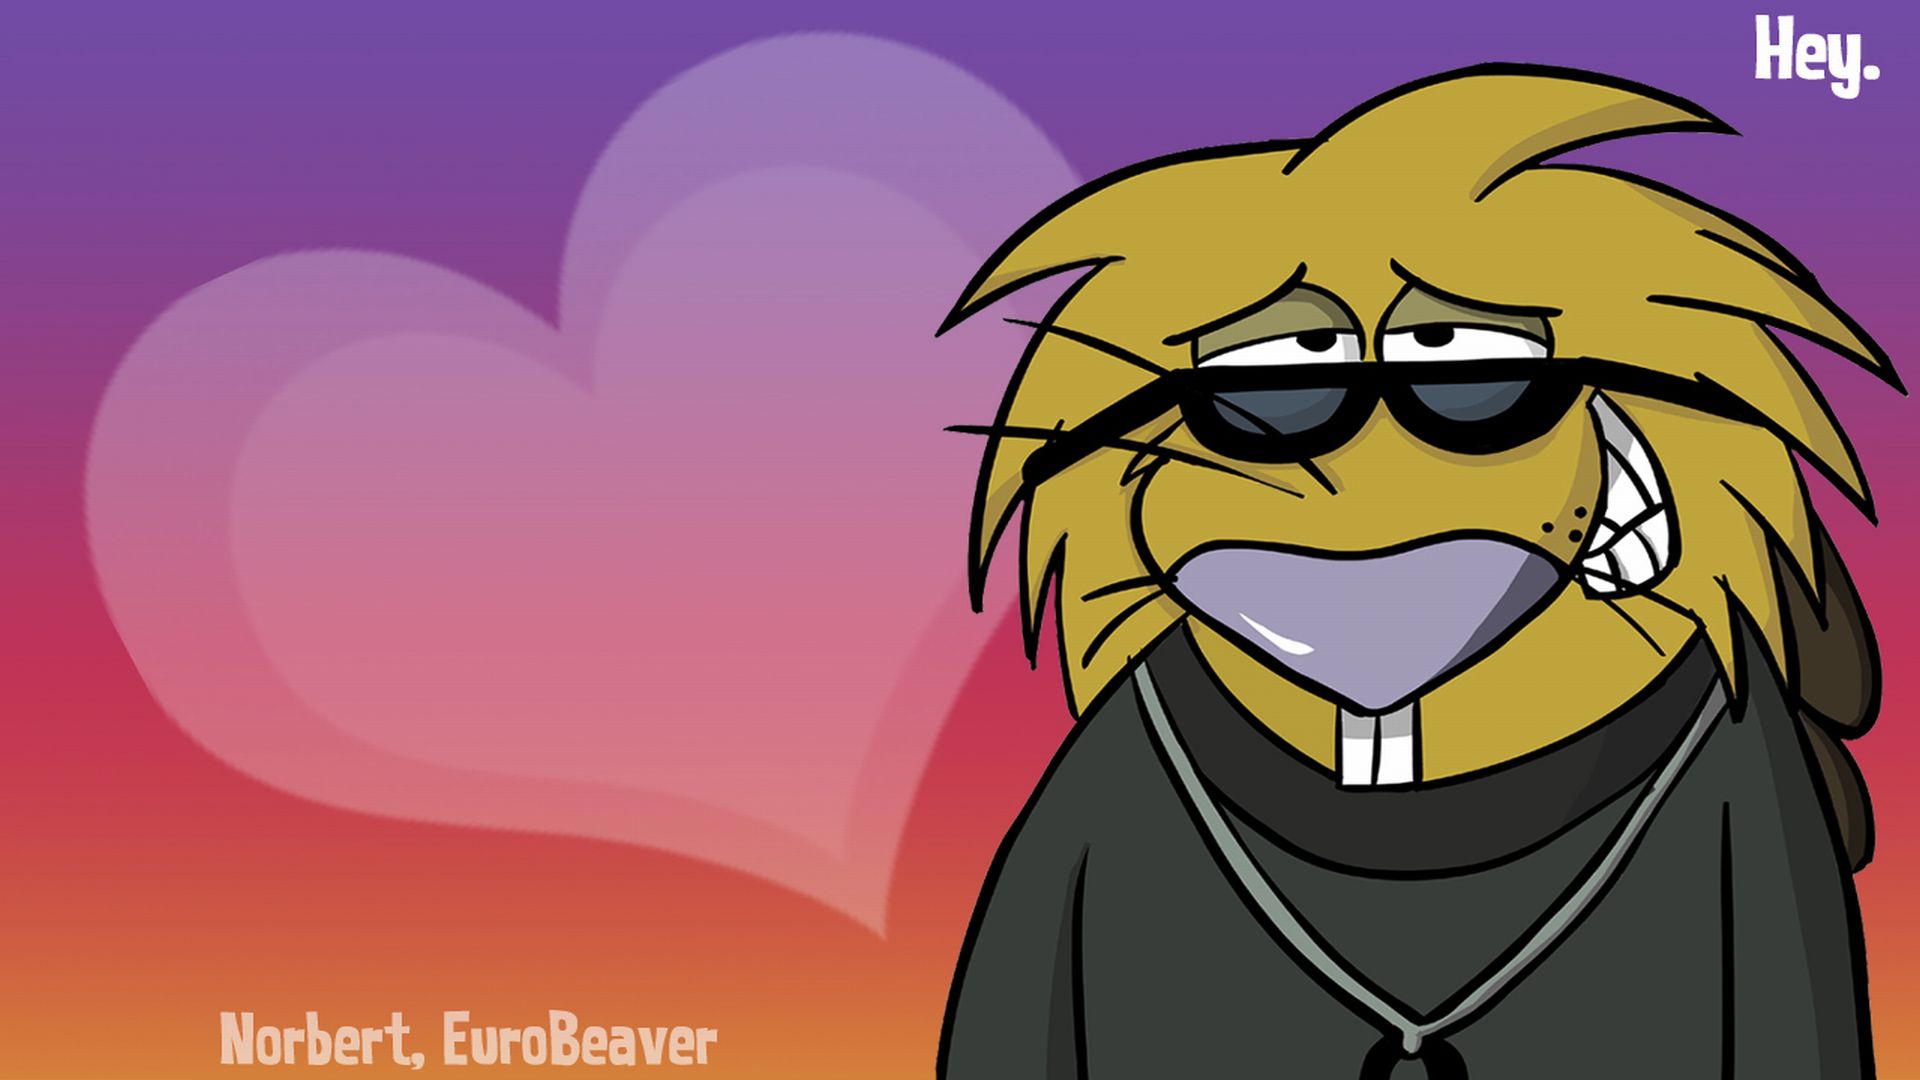 the, Angry, Beavers Wallpaper